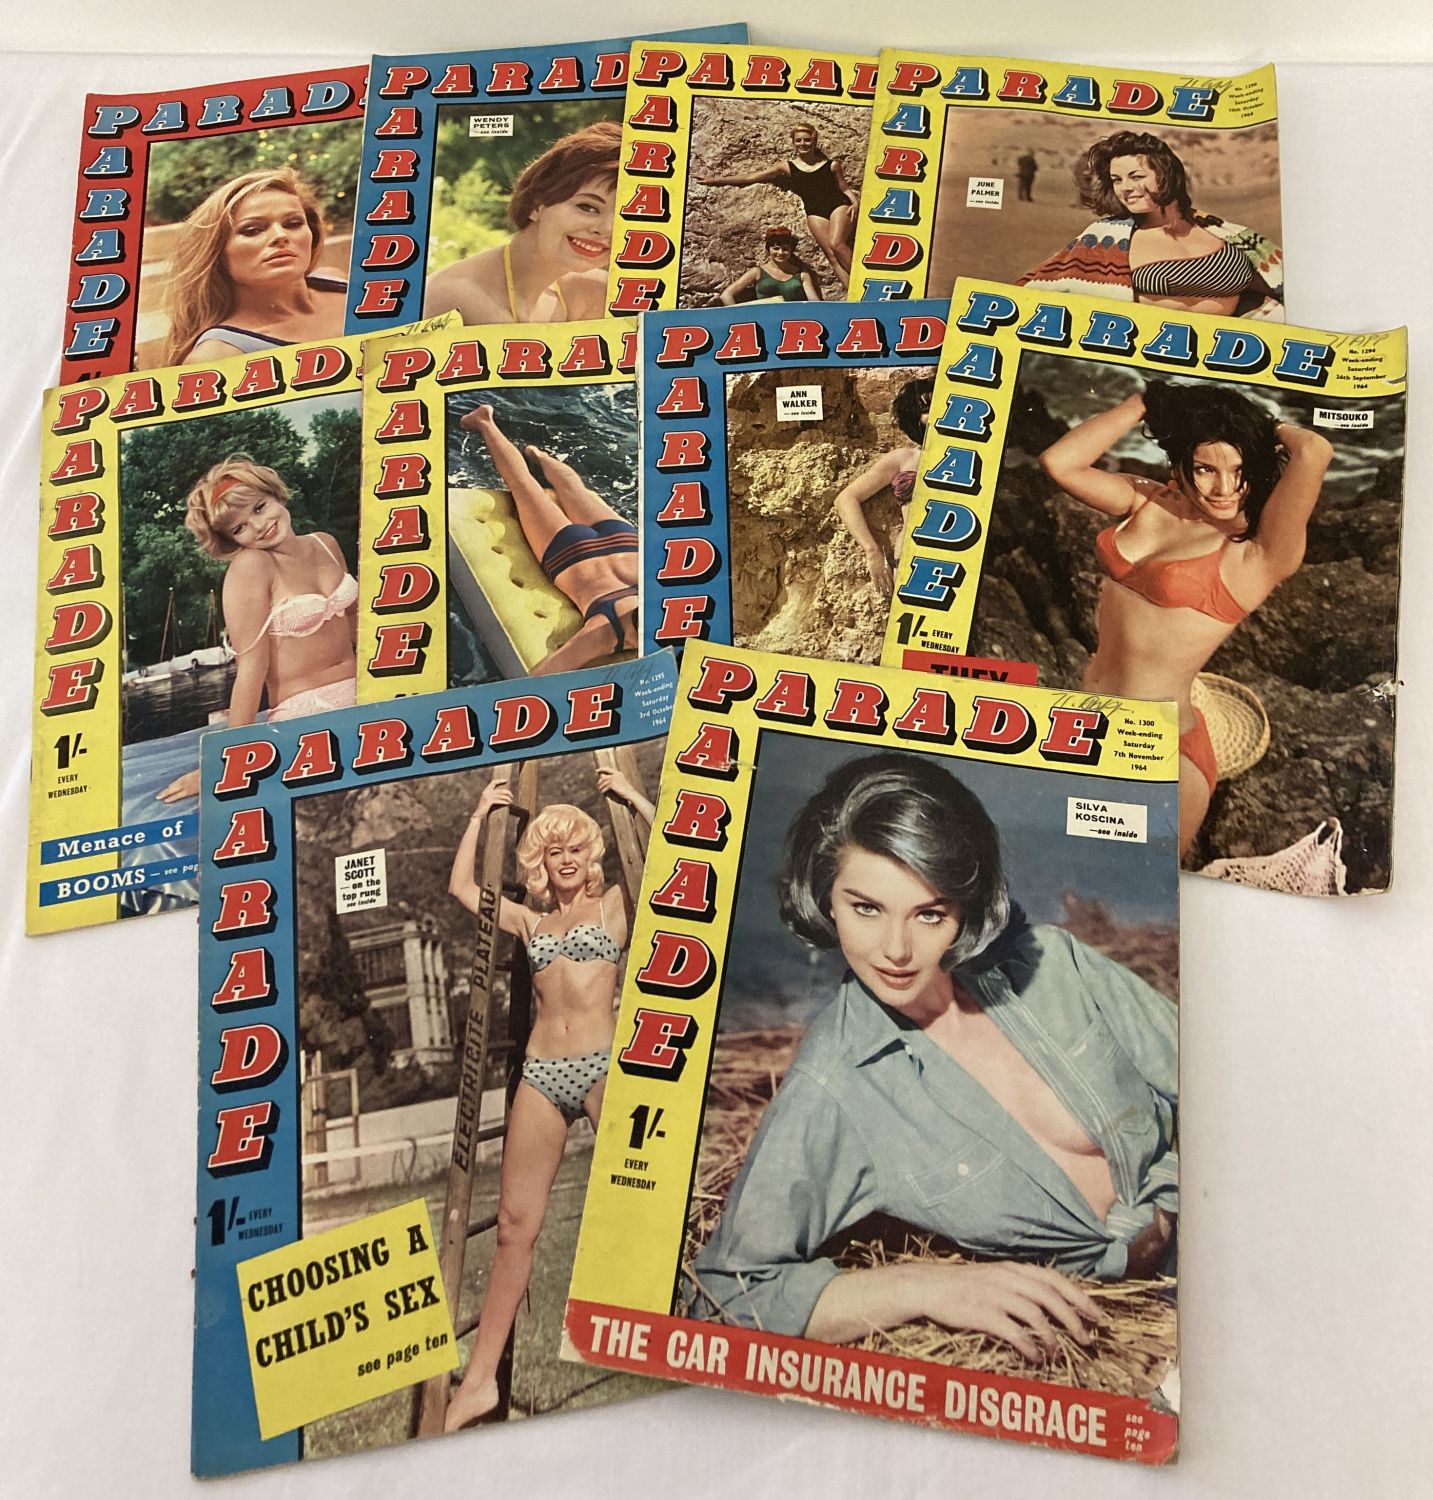 10 vintage 1960's issues of Parade, adult erotic magazine, dating from 1964.